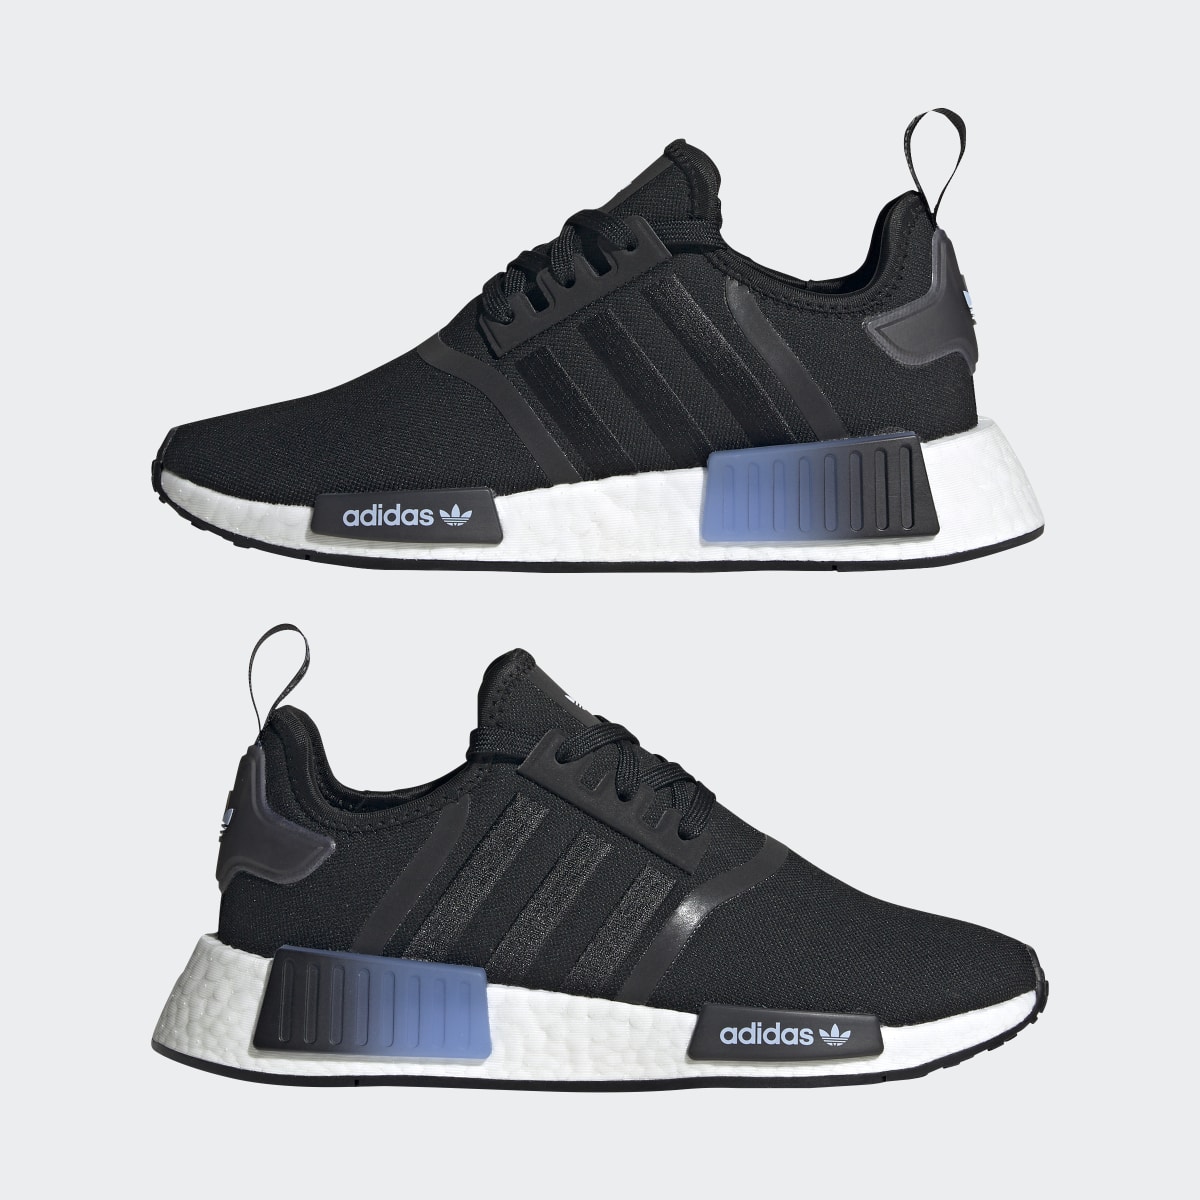 Adidas NMD_R1 Shoes. 14